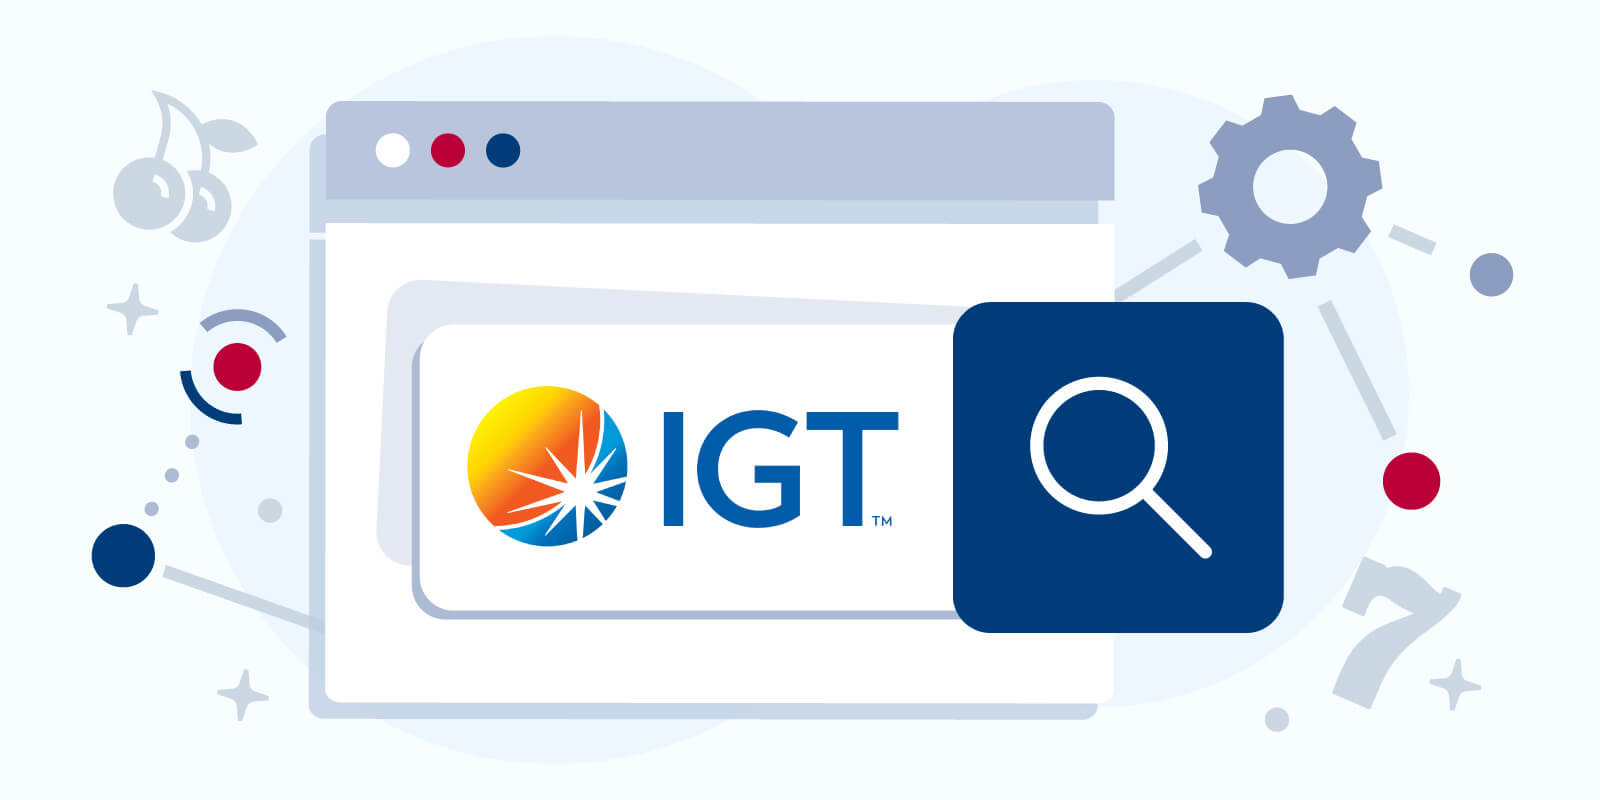 IGT Software Company Overview